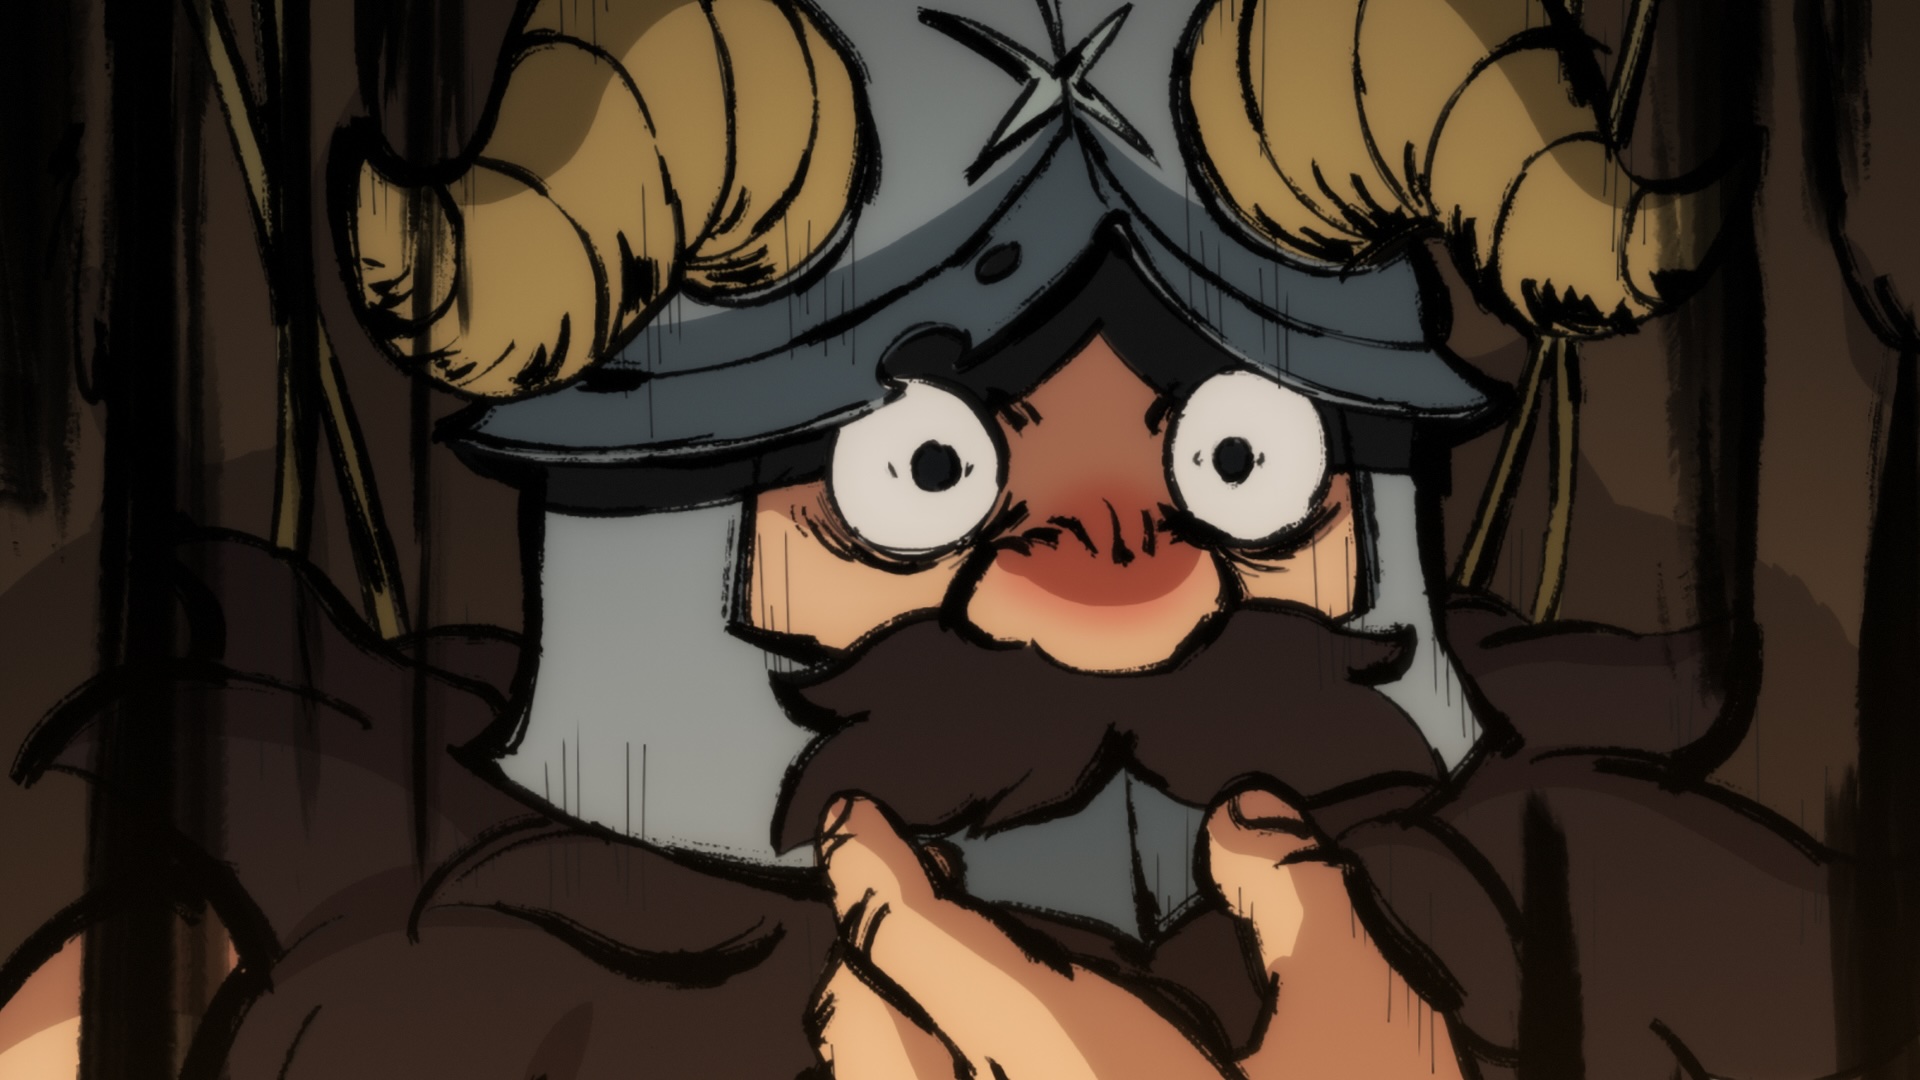 A close of Senshi the dwarf looking surprised, his eyes very wide. He’s rendered in sketchier lines than usual, to indicate the high level of surprise. A screencap from the anime series Delicious in Dungeon.